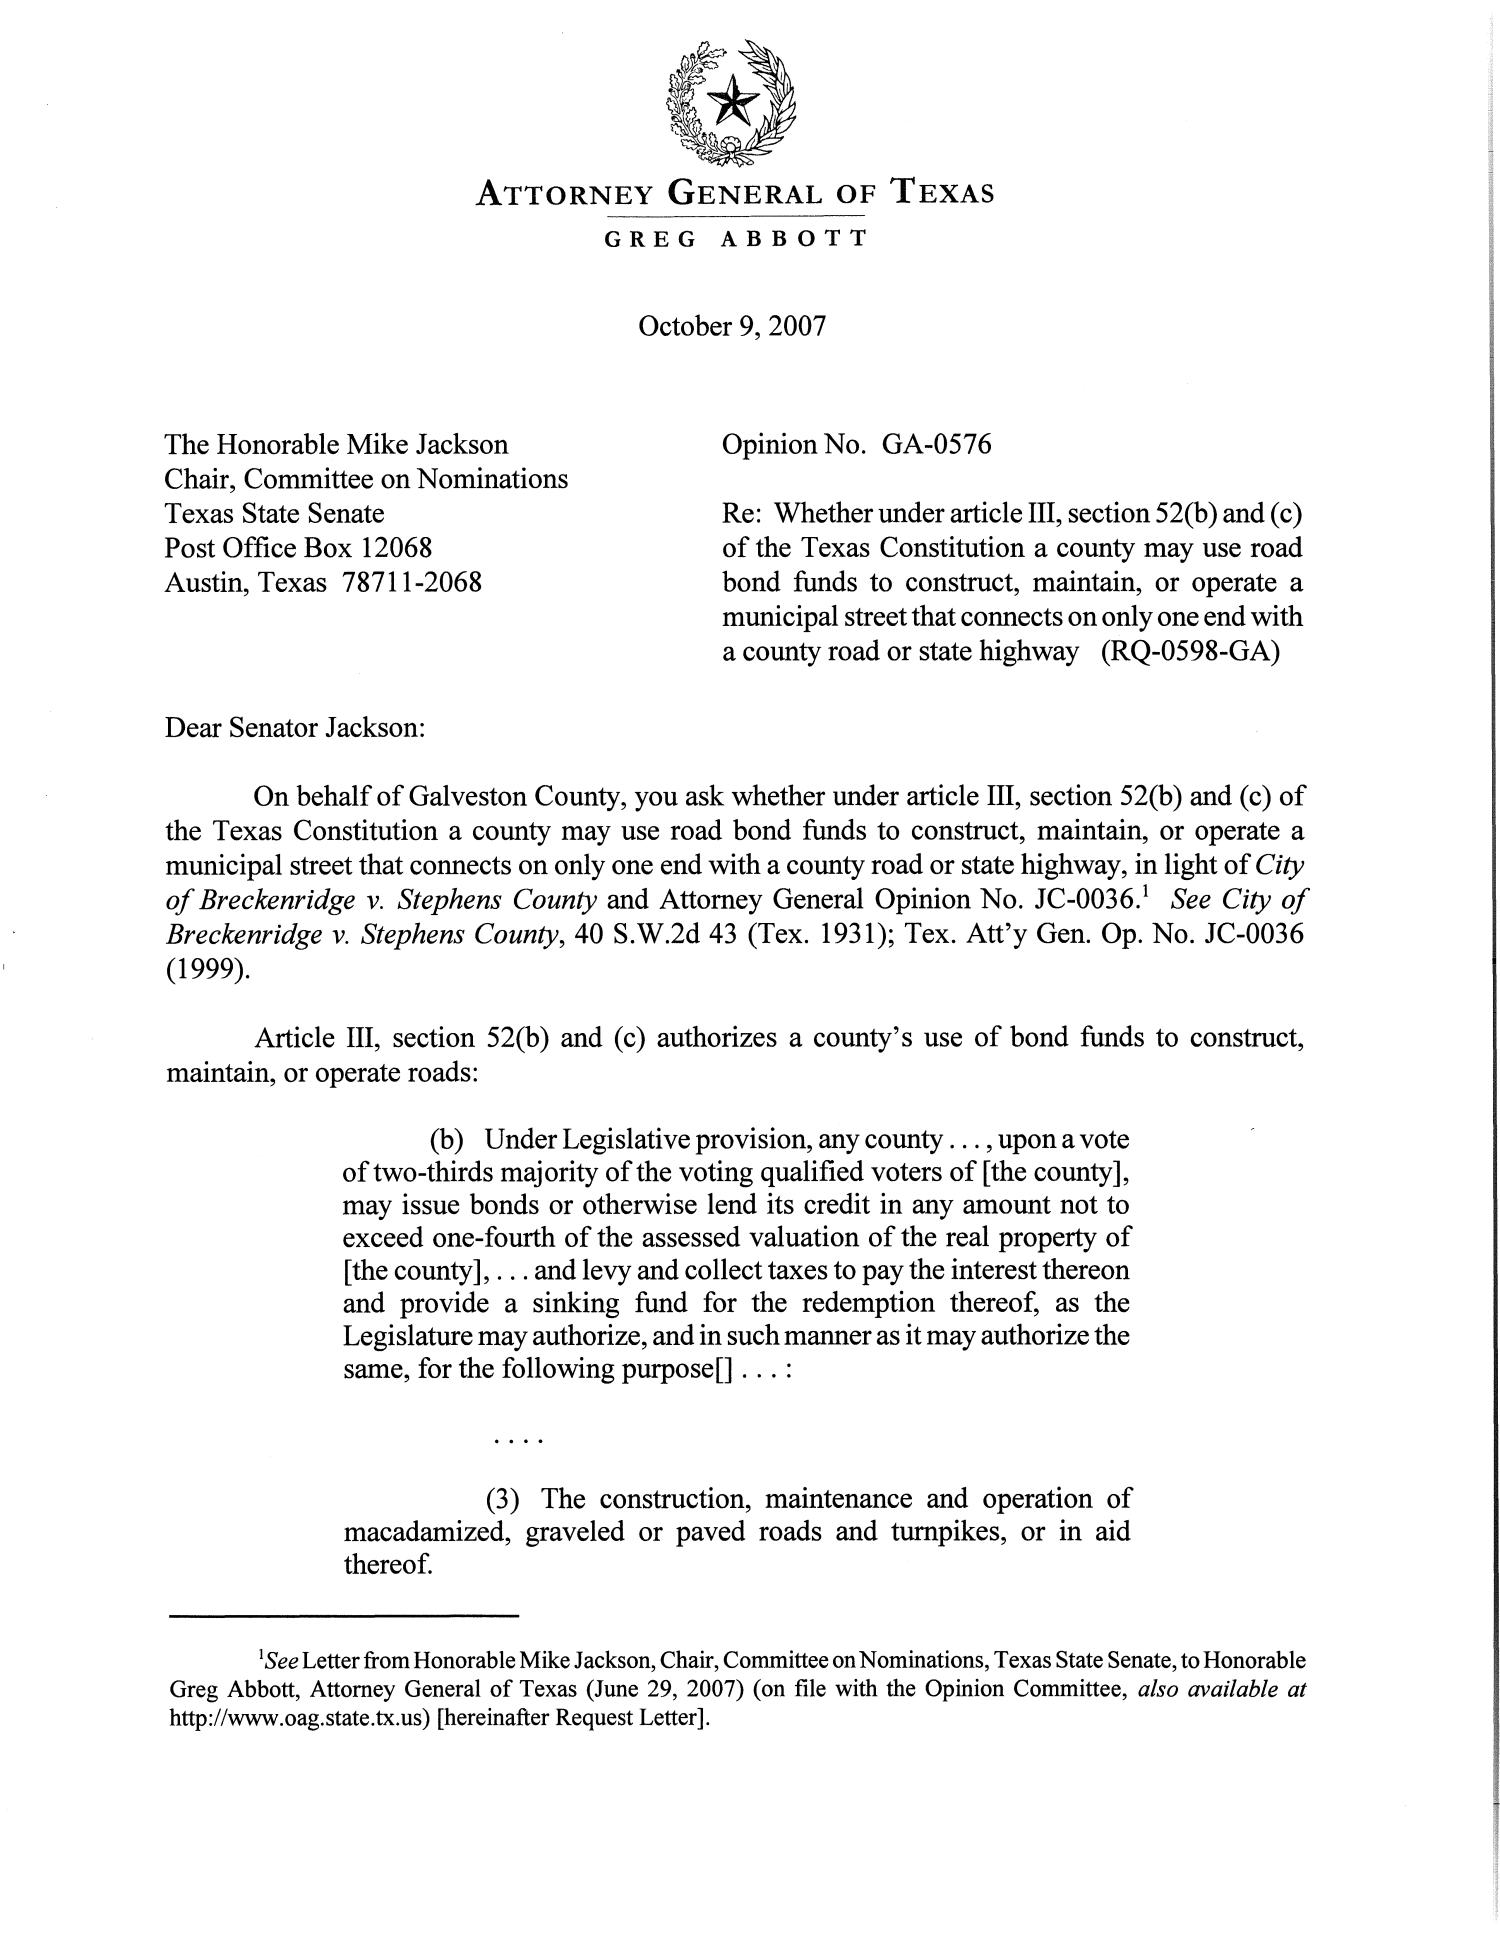 Texas Attorney General Opinion: GA-0576
                                                
                                                    [Sequence #]: 1 of 4
                                                